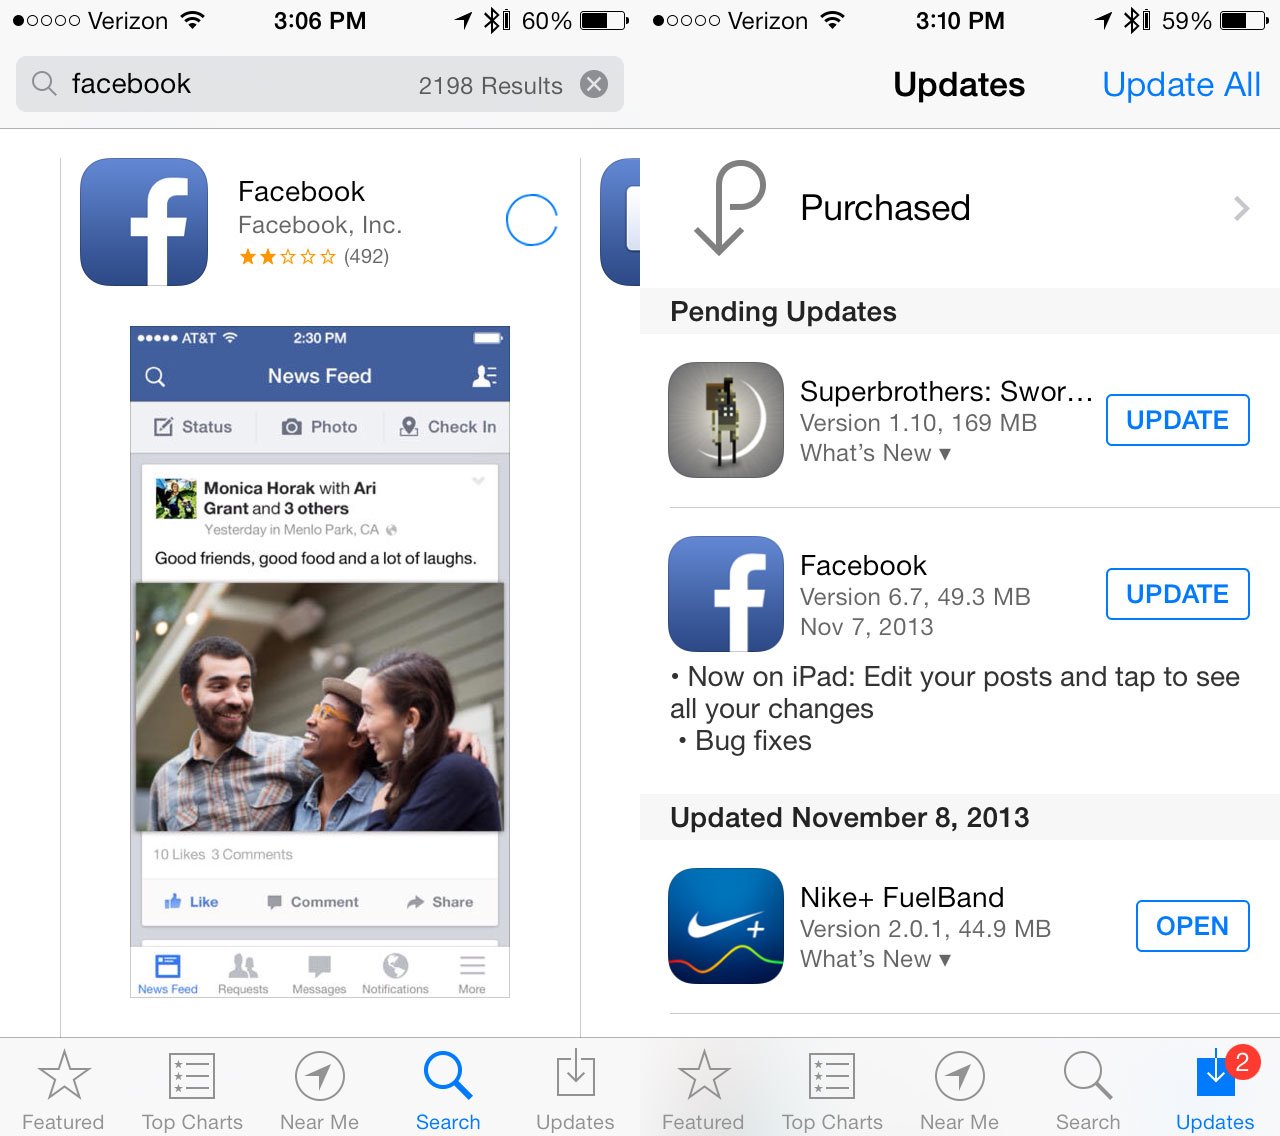 Facebook for iPhone 6.7 is crashing for most users, here's a possible fix.